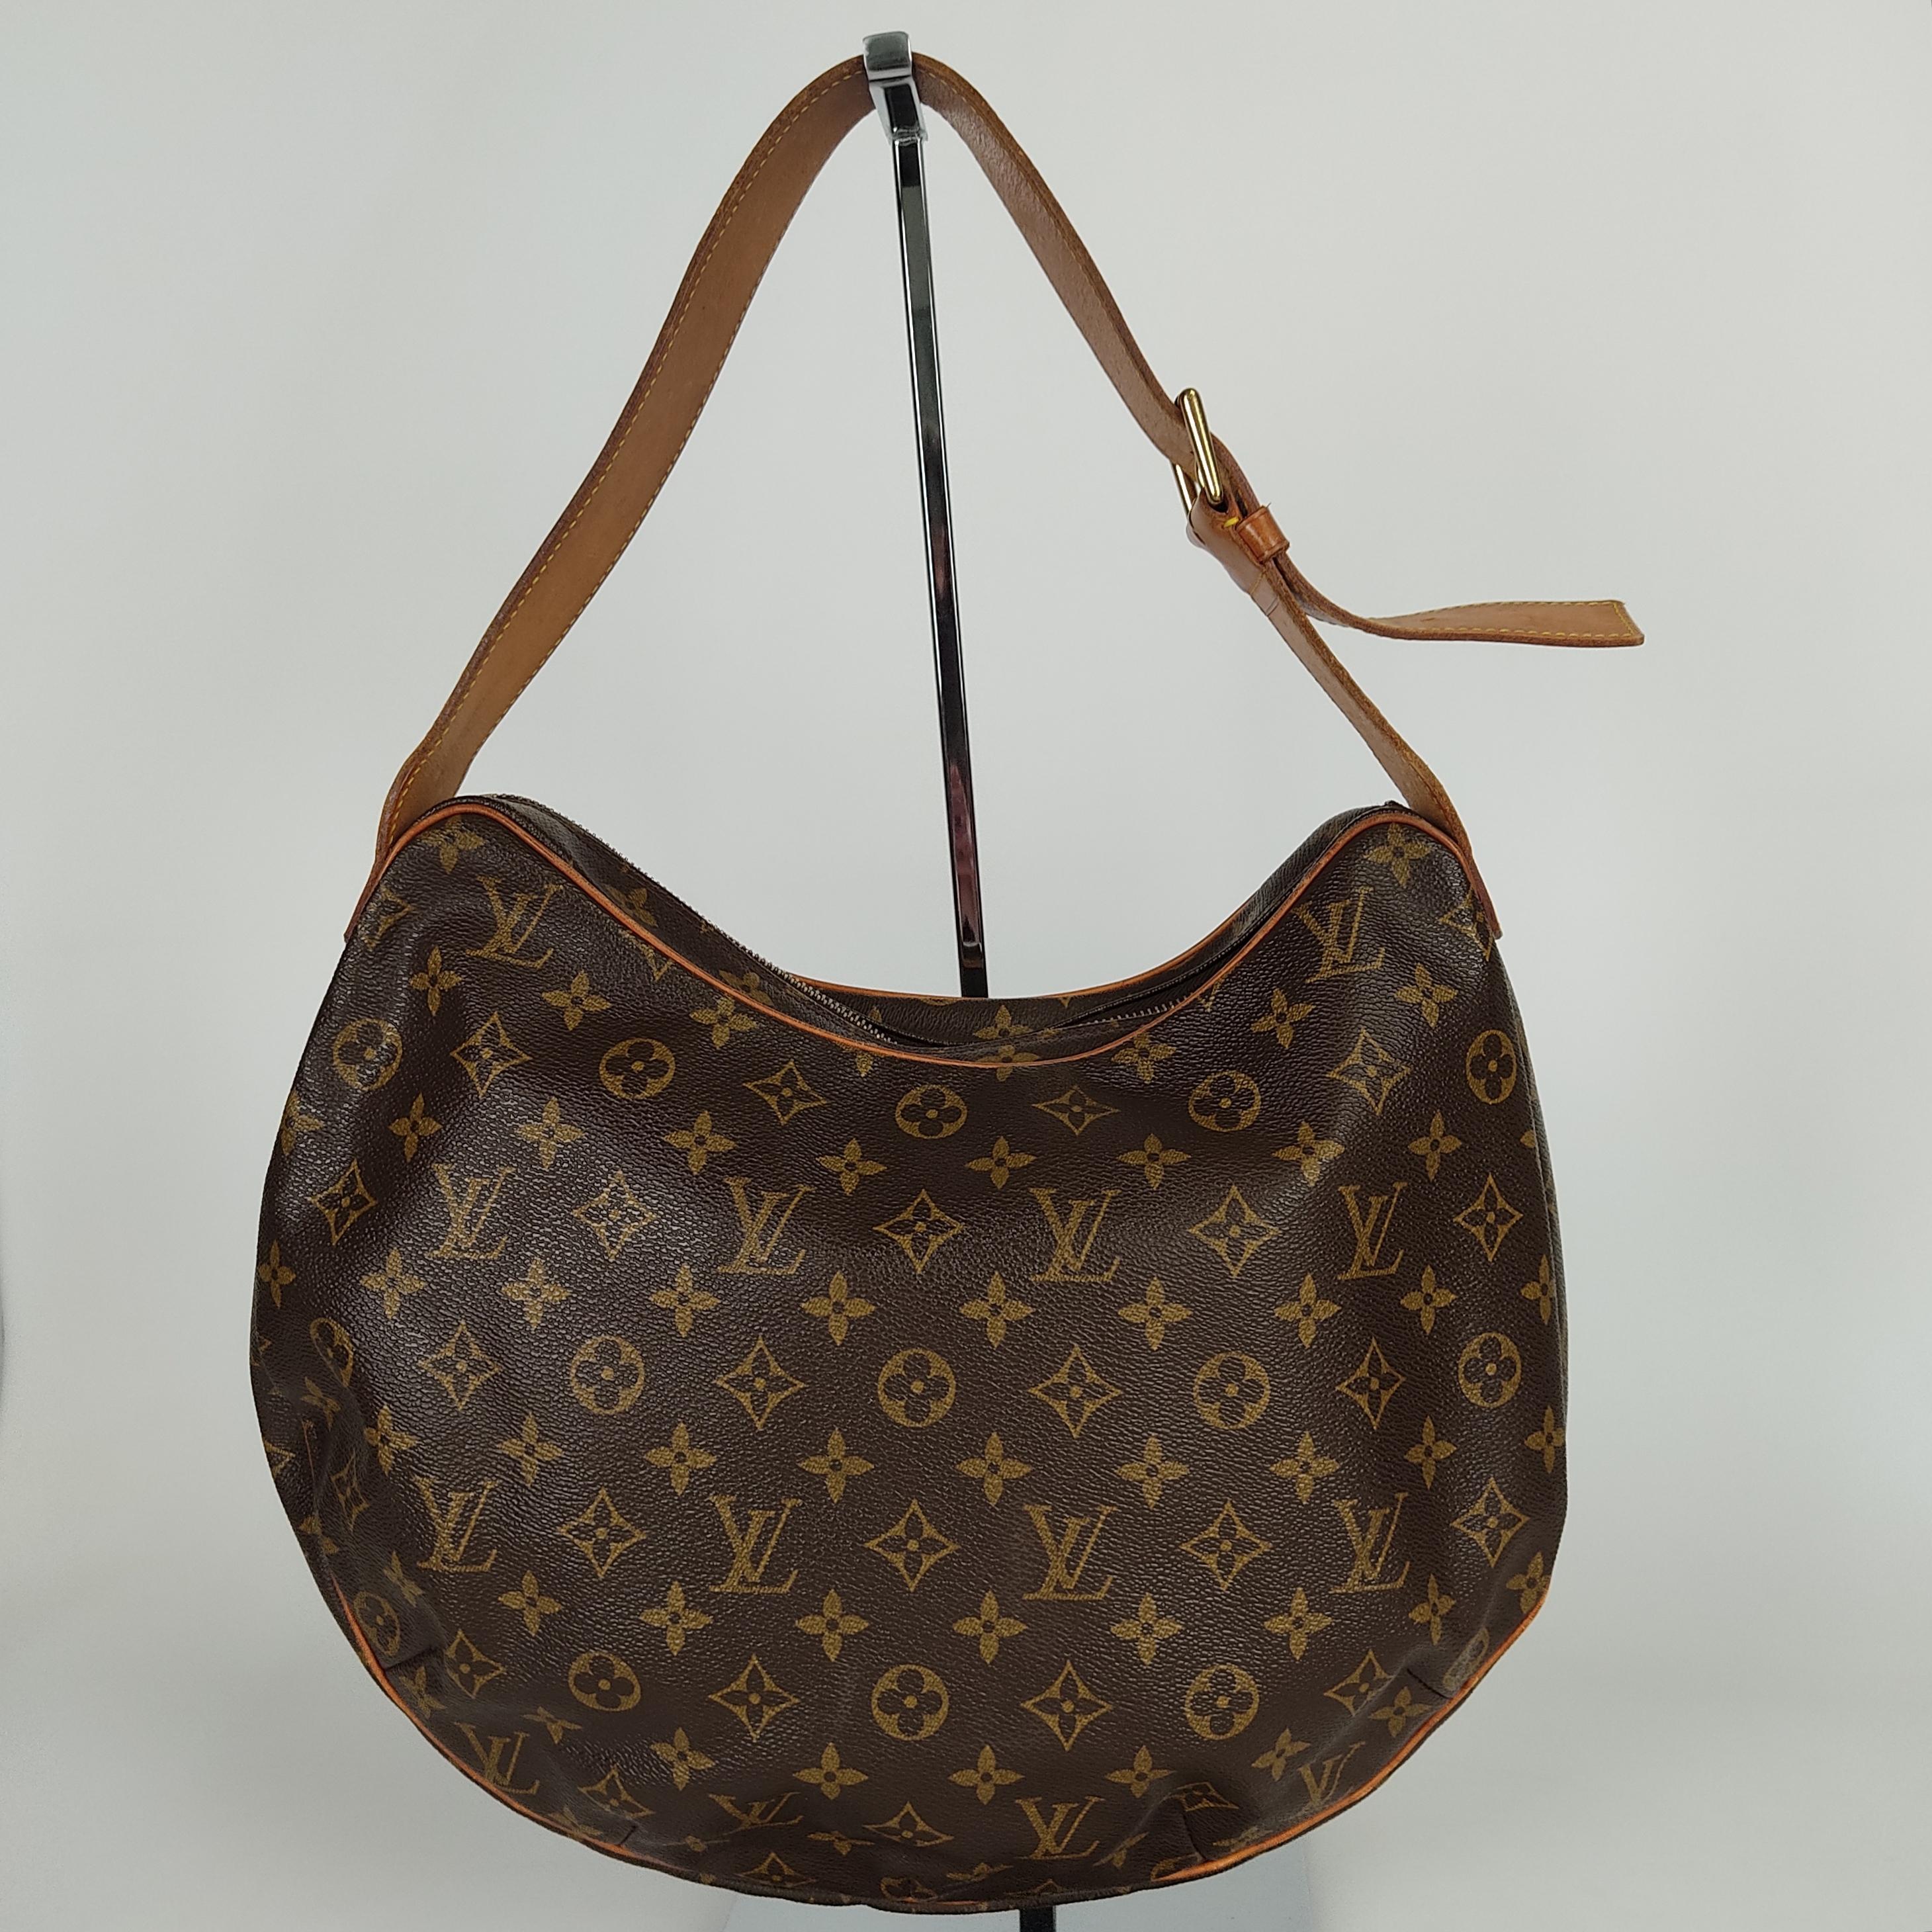 Croissant GM monogram shoulder bag Monogram canvas shoulder bag with cowhide handle. Gold colored hardware, no noticeable scratches. Zip closure. Red velvet interior with two small pockets. The cowhide inserts have small spots.

Length: 38